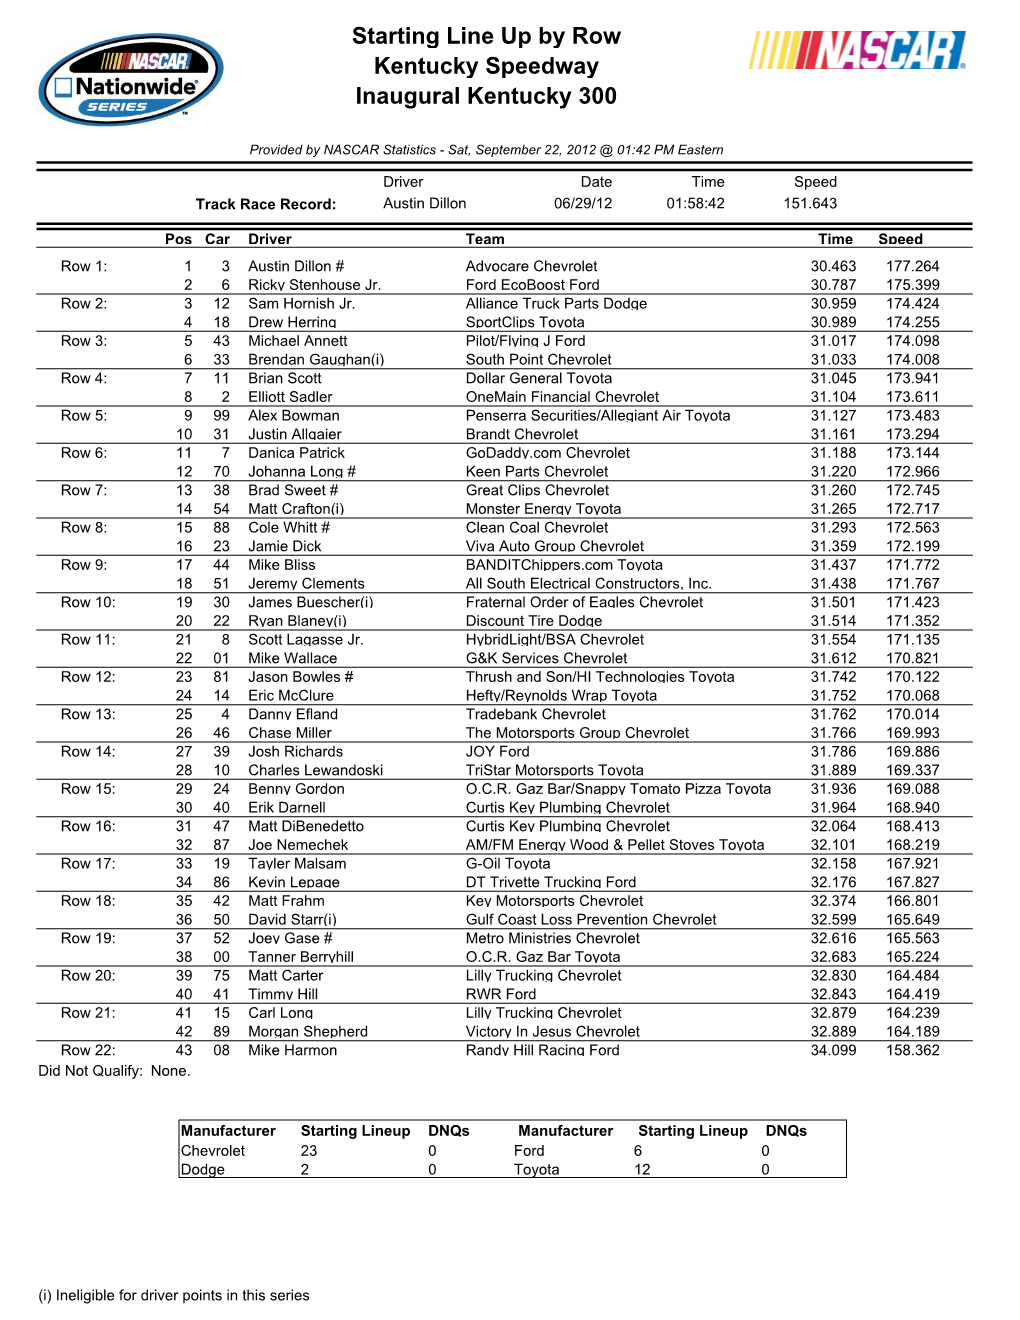 Starting Line up by Row Kentucky Speedway Inaugural Kentucky 300